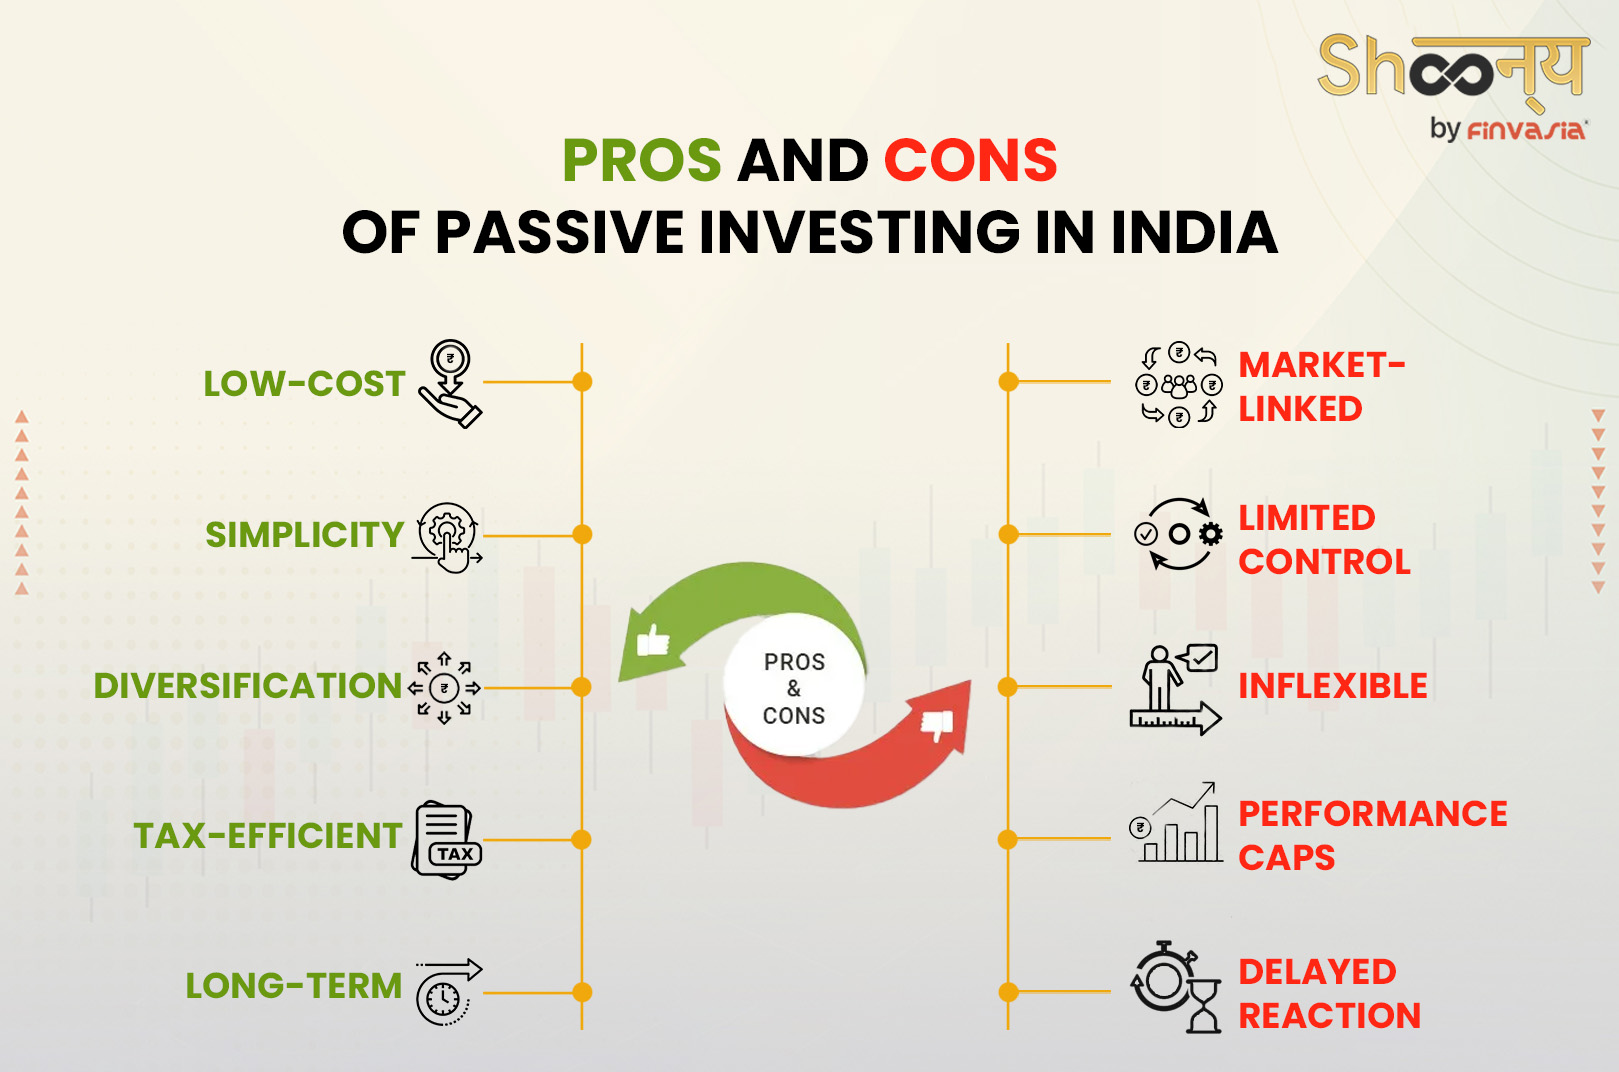 Pros and Cons of Passive Investing in India
